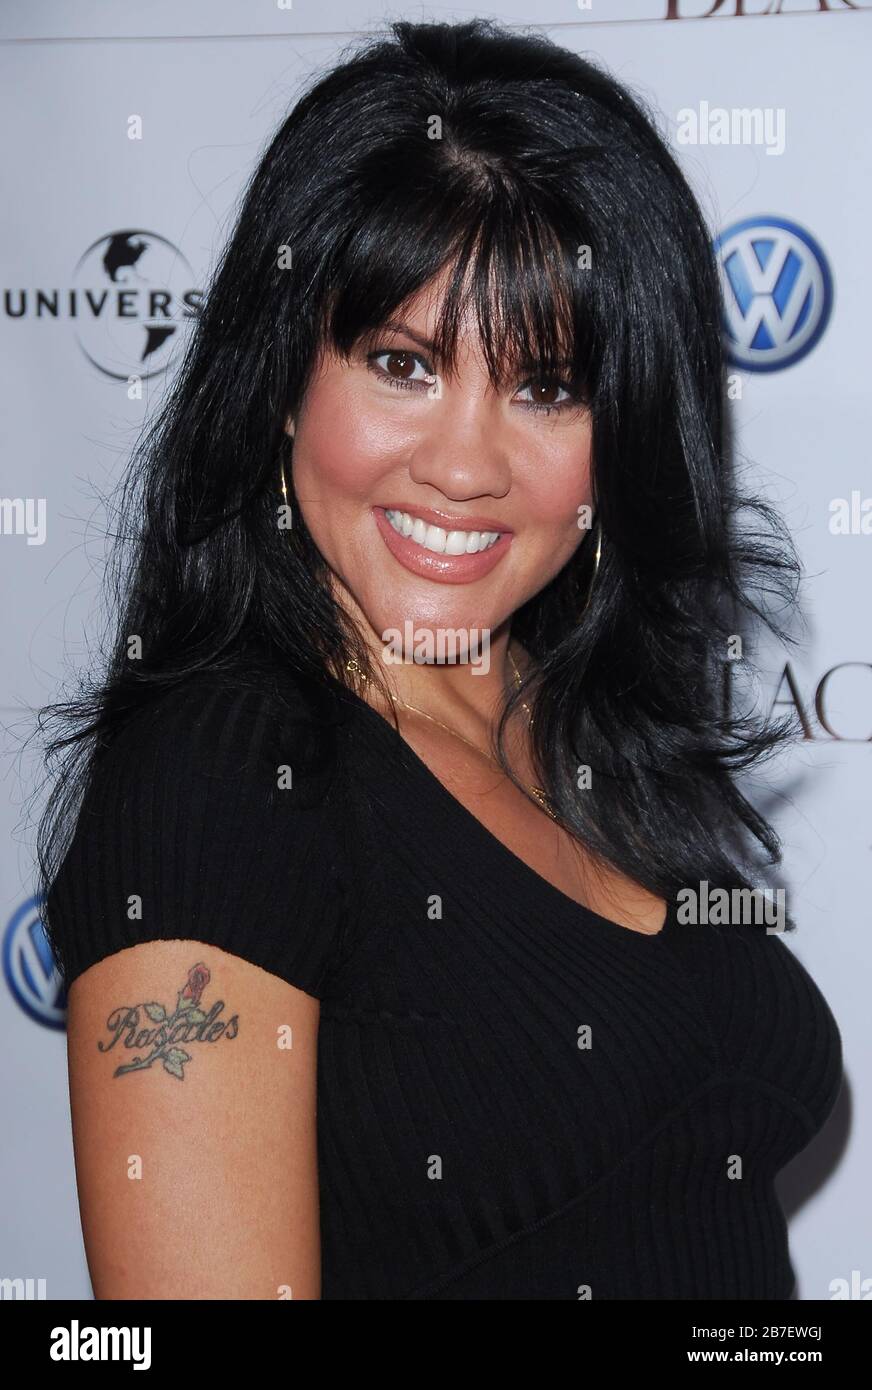 Mia St. John at the Los Angeles Premiere of 'The Black Dahlia' held at the Samuel Goldwyn Theater at the Academy of Motion Picture Arts and Sciences in Beverly Hills, CA. The event took place on Wednesday, September 6, 2006.  Photo by: SBM / PictureLux Stock Photo